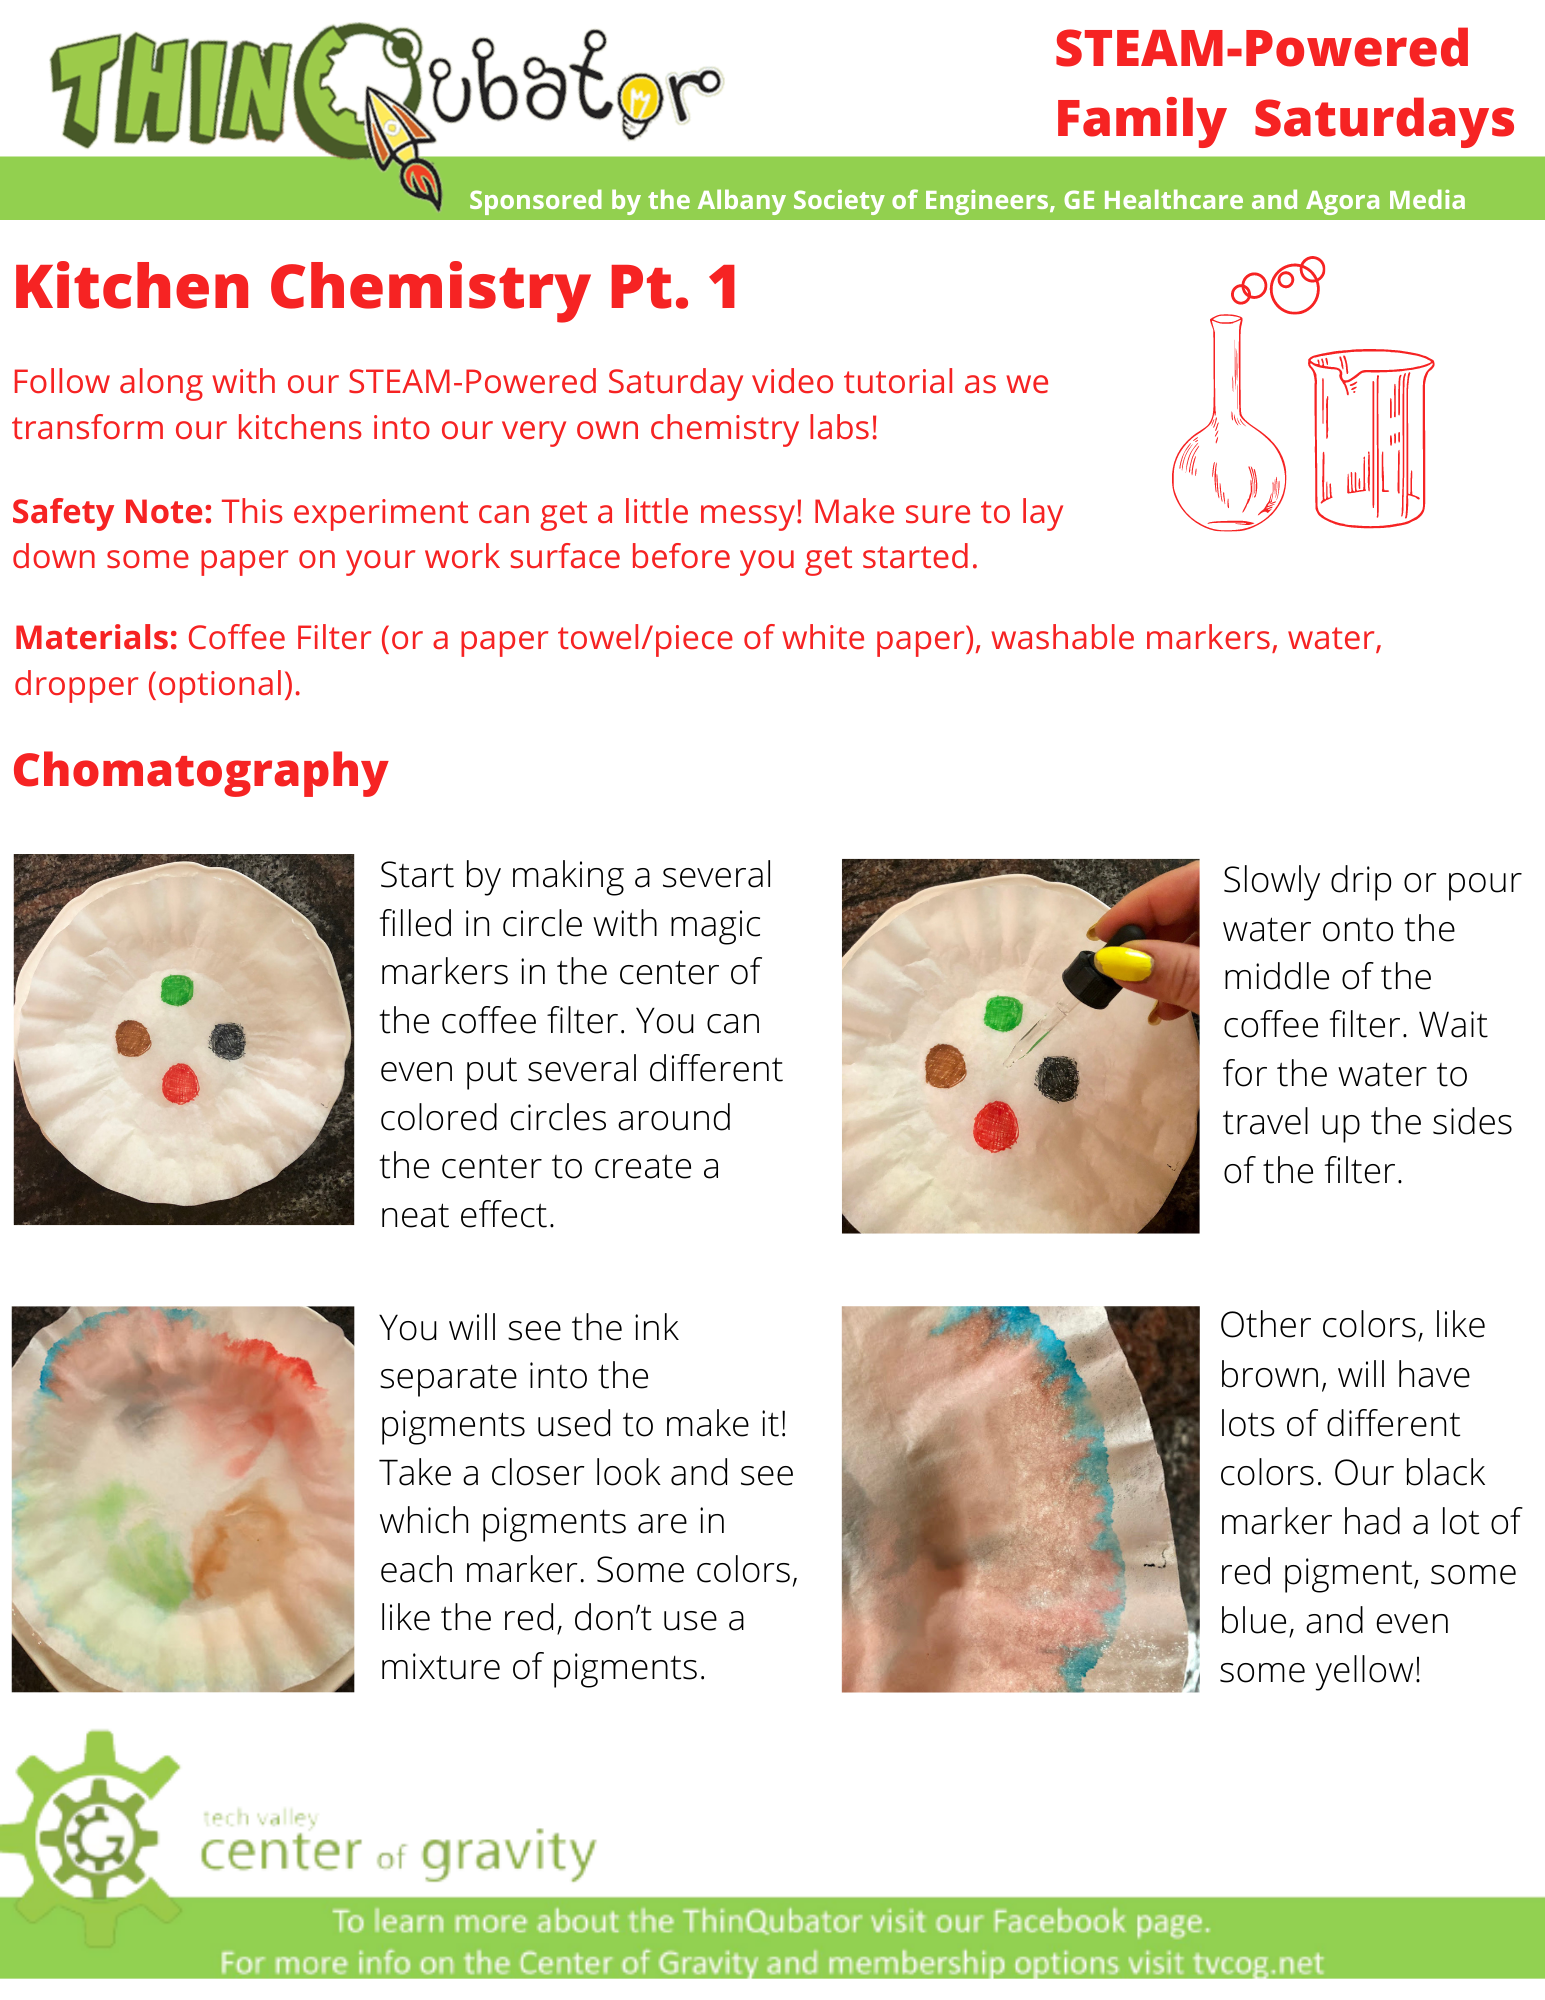 STEAM_Powered_Saturday_Project_Guide__Kitchen_Chemistry_Pt._1.png - 1.45 MB